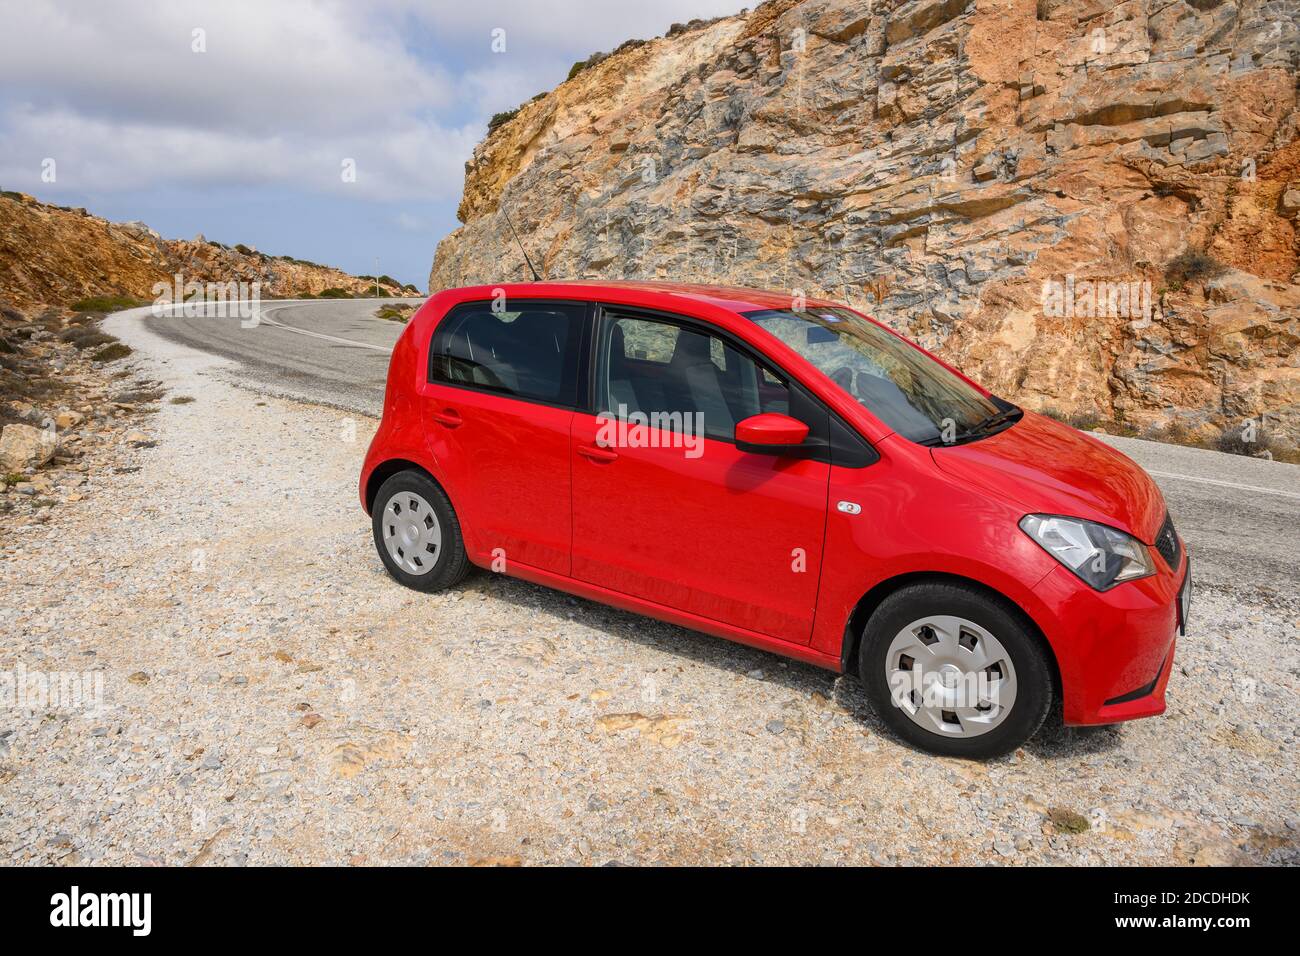 Ios, Greece - September 20, 2020: Red Seat Mii on the road in the mountainous part of Ios Island. Cyclades, Greece Stock Photo